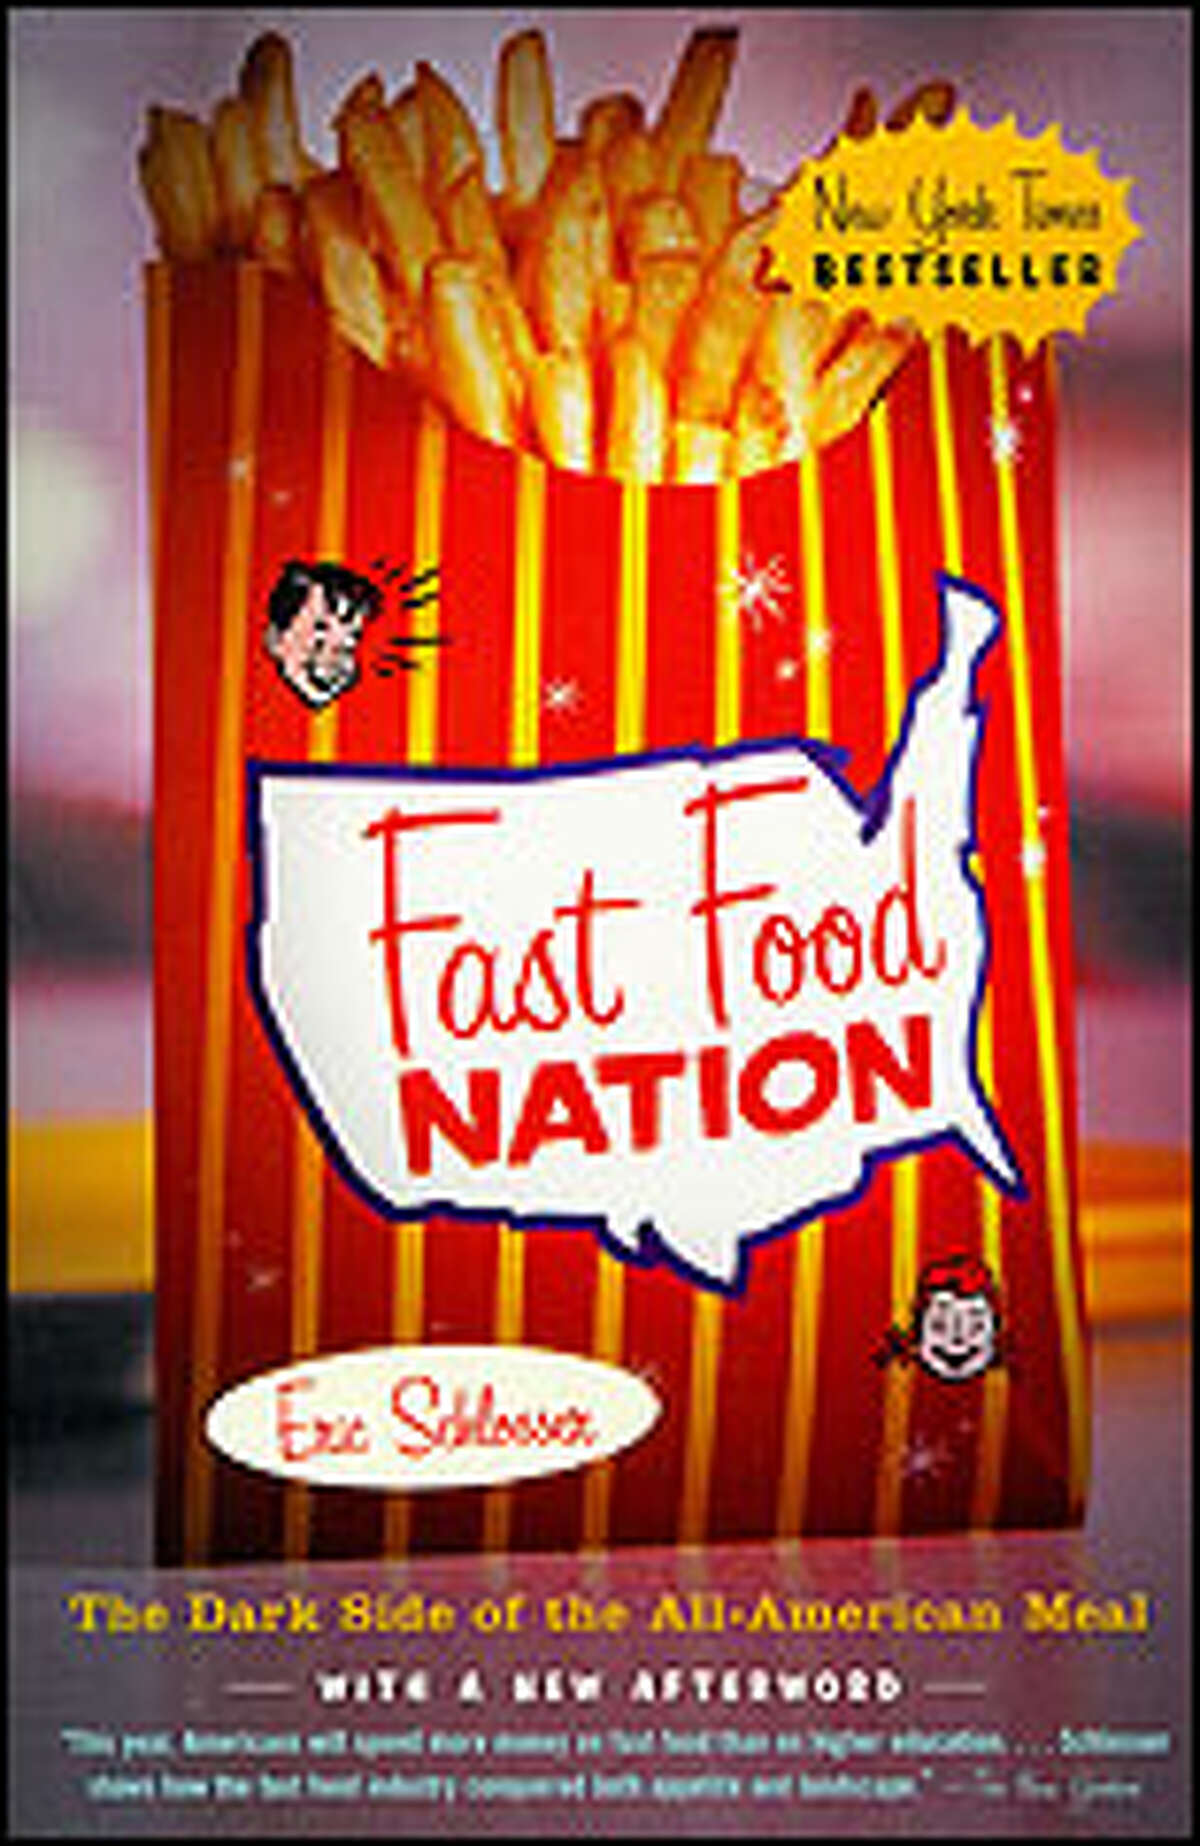 Reporter Eric Schlosser details the shift in the global economy and diet with his exposé about the meatpacking and fast-food industries, "Fast Food Nation."